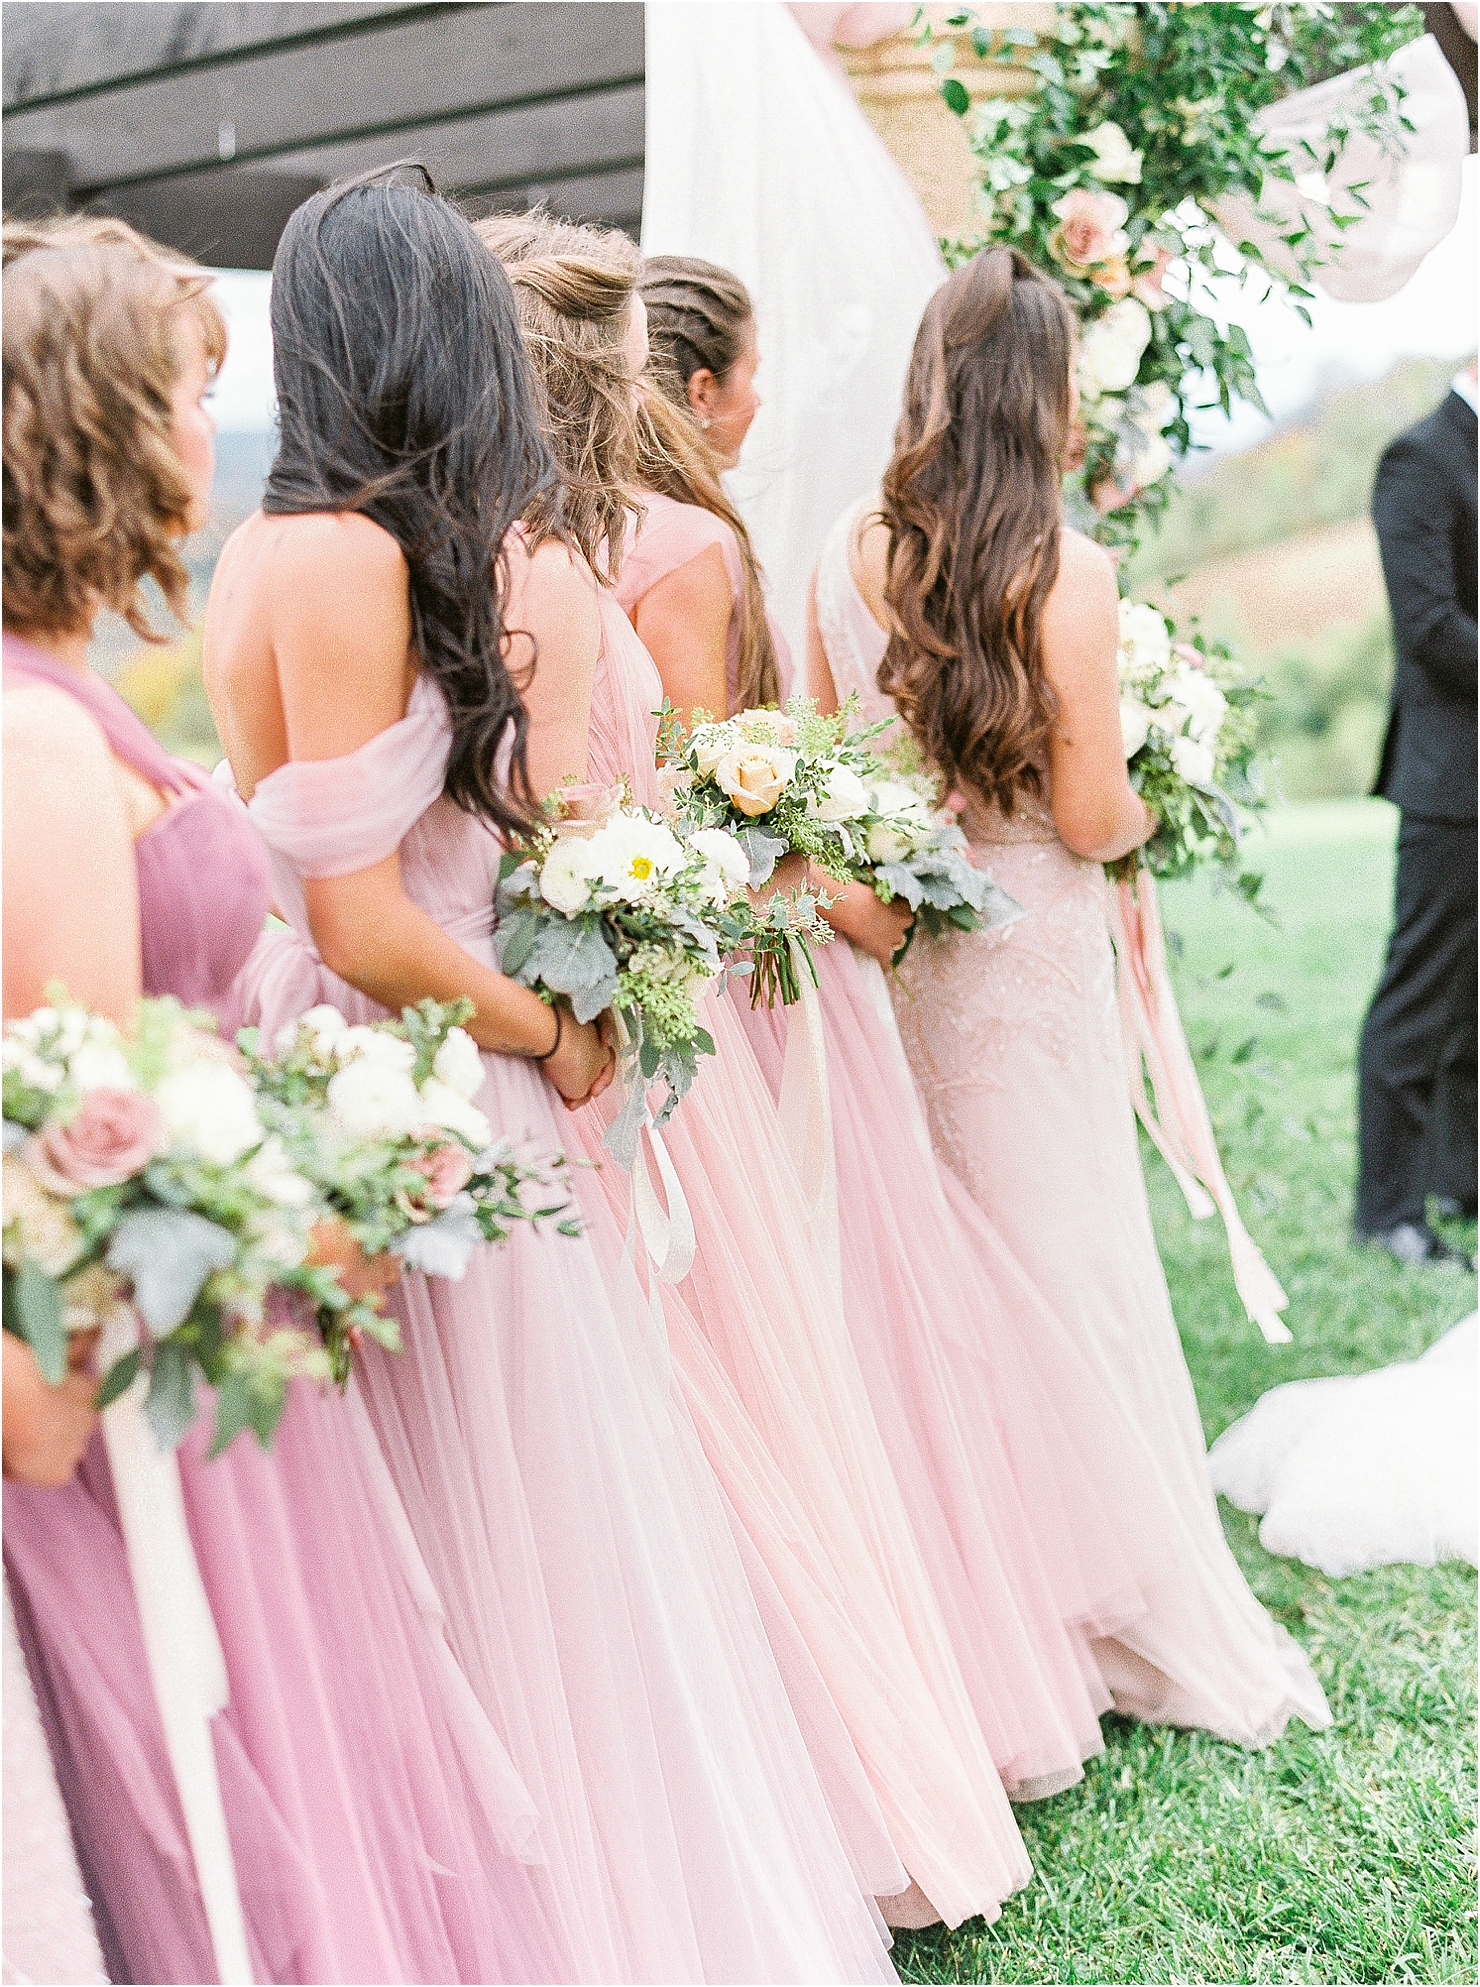 Bridesmaids Blush Revelry Adrianna Papel Blush Mix Matched Dresses Evelyn Bridal Gown English Ivy French Balcony Architecture Chateau Chateau Selah Madeline Trent Romantic Wedding Photographer